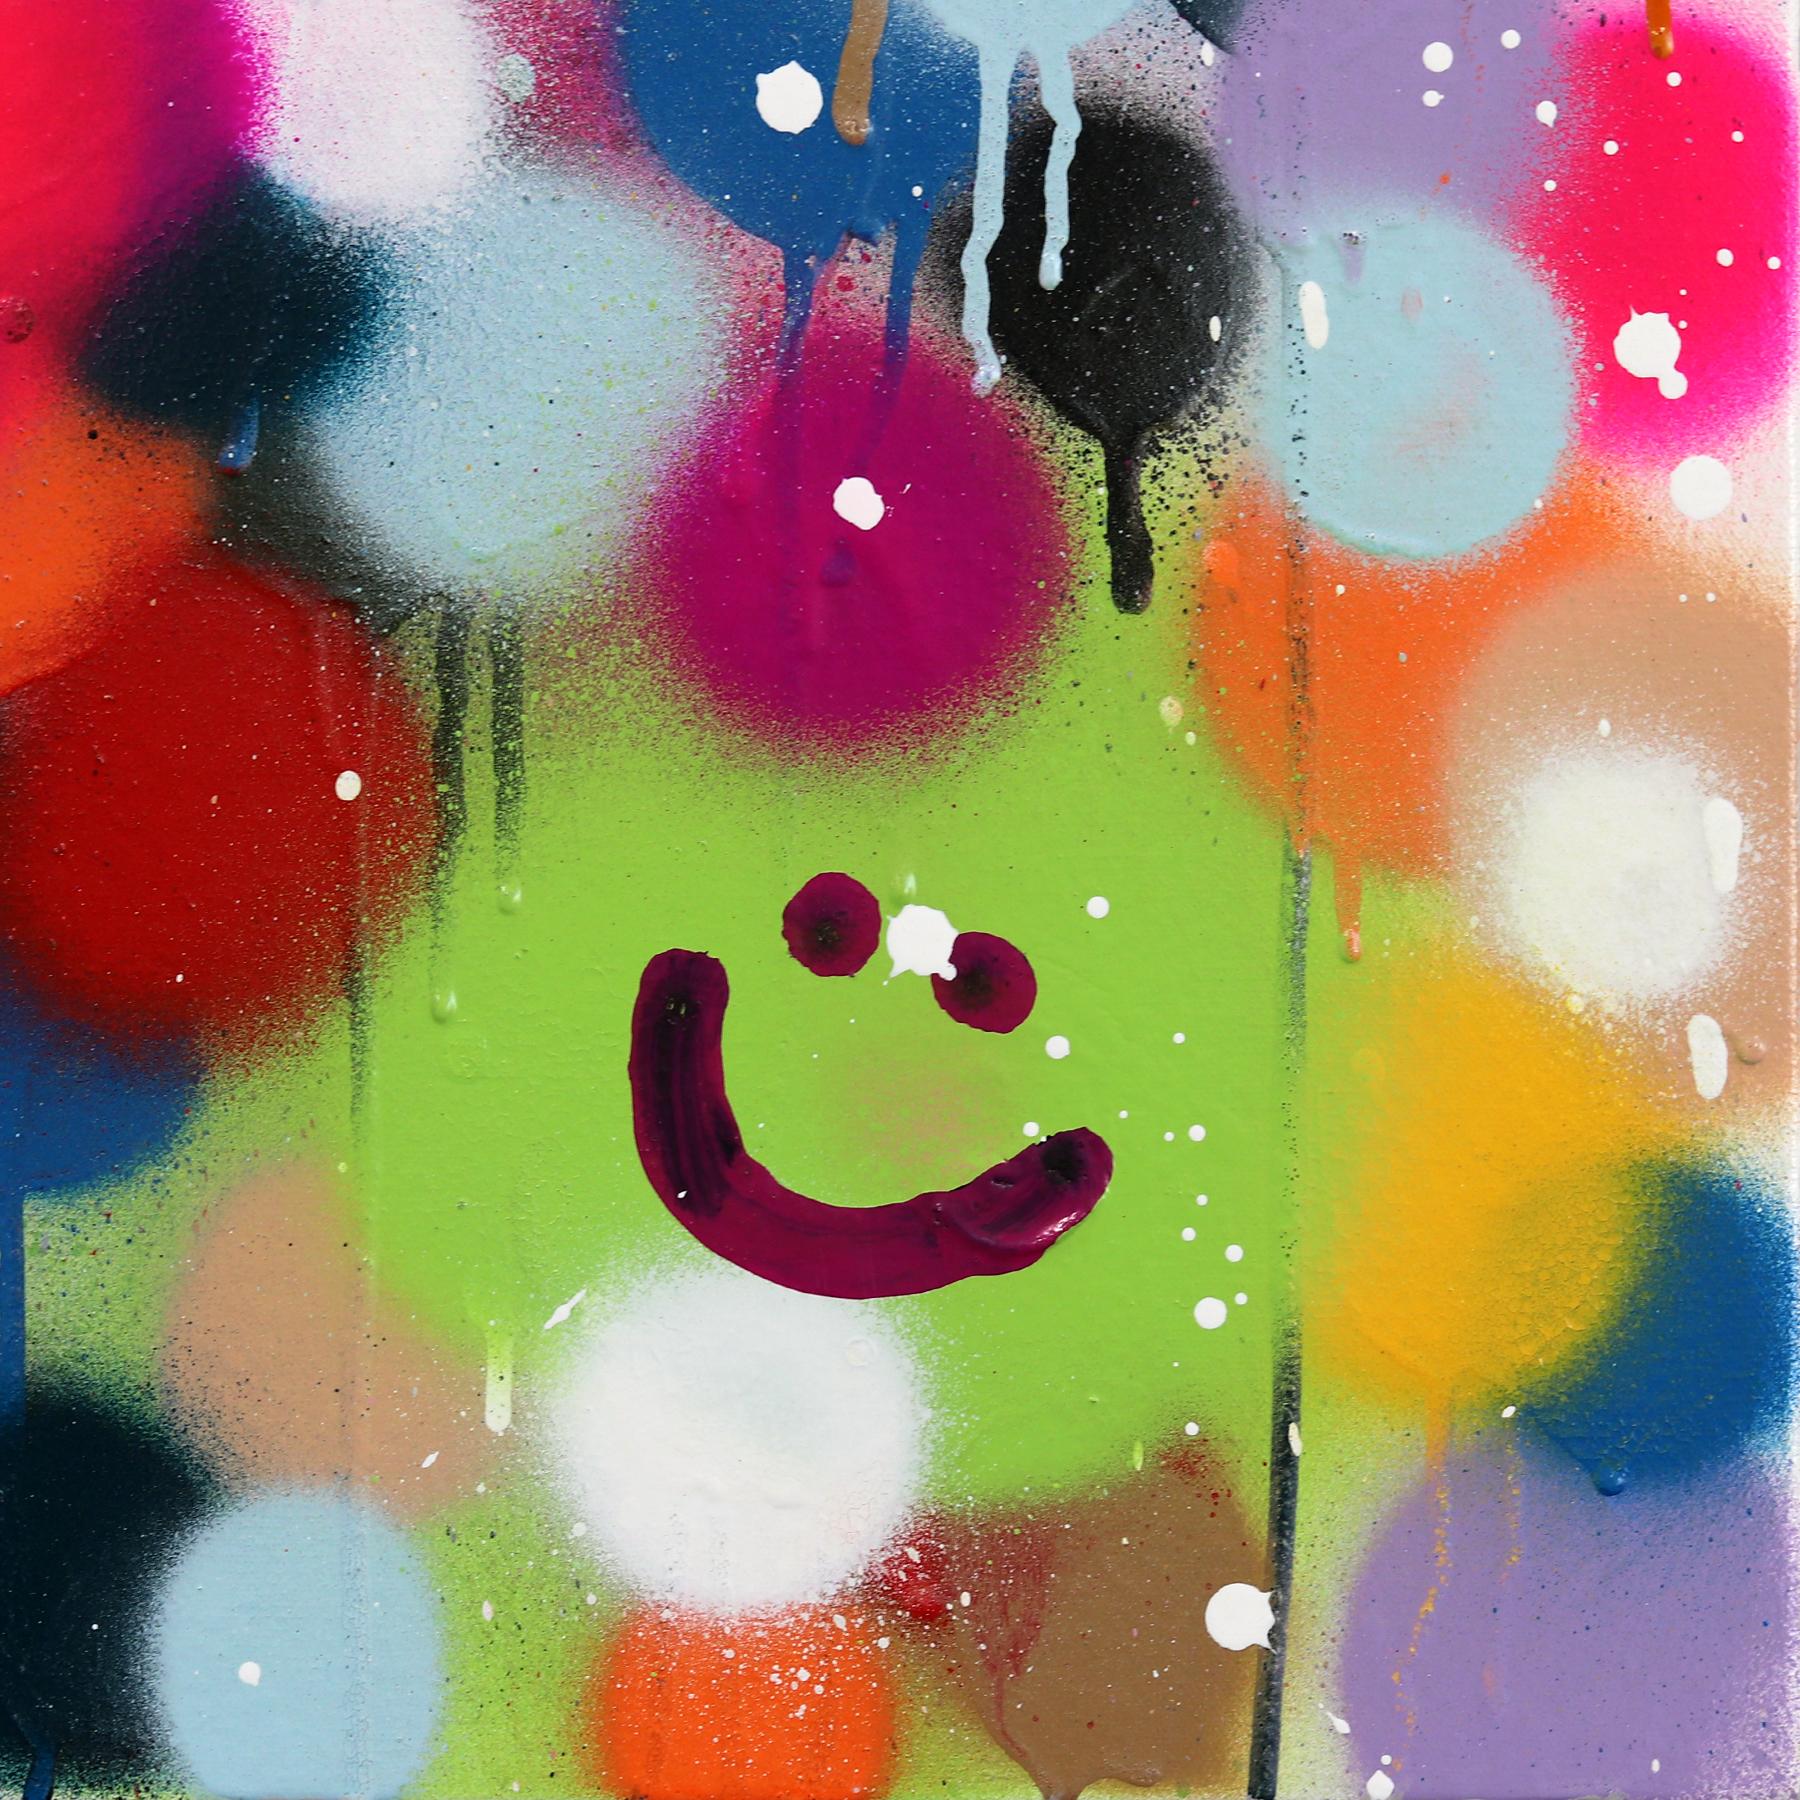 Smile, Be Happy - Colorful Original Love Graffiti Painting on Canvas For Sale 6